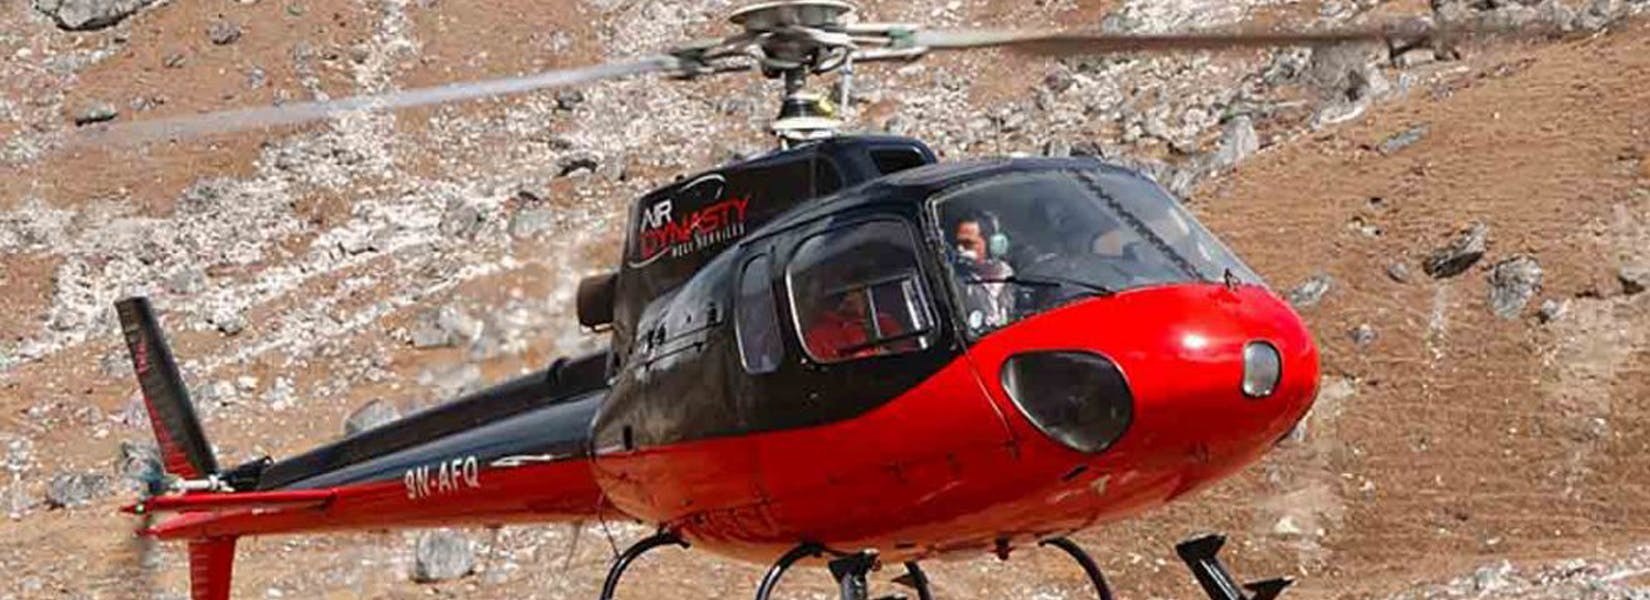 Langtang Valley Helicopter Tour - <span class="font-light">1 days</span>